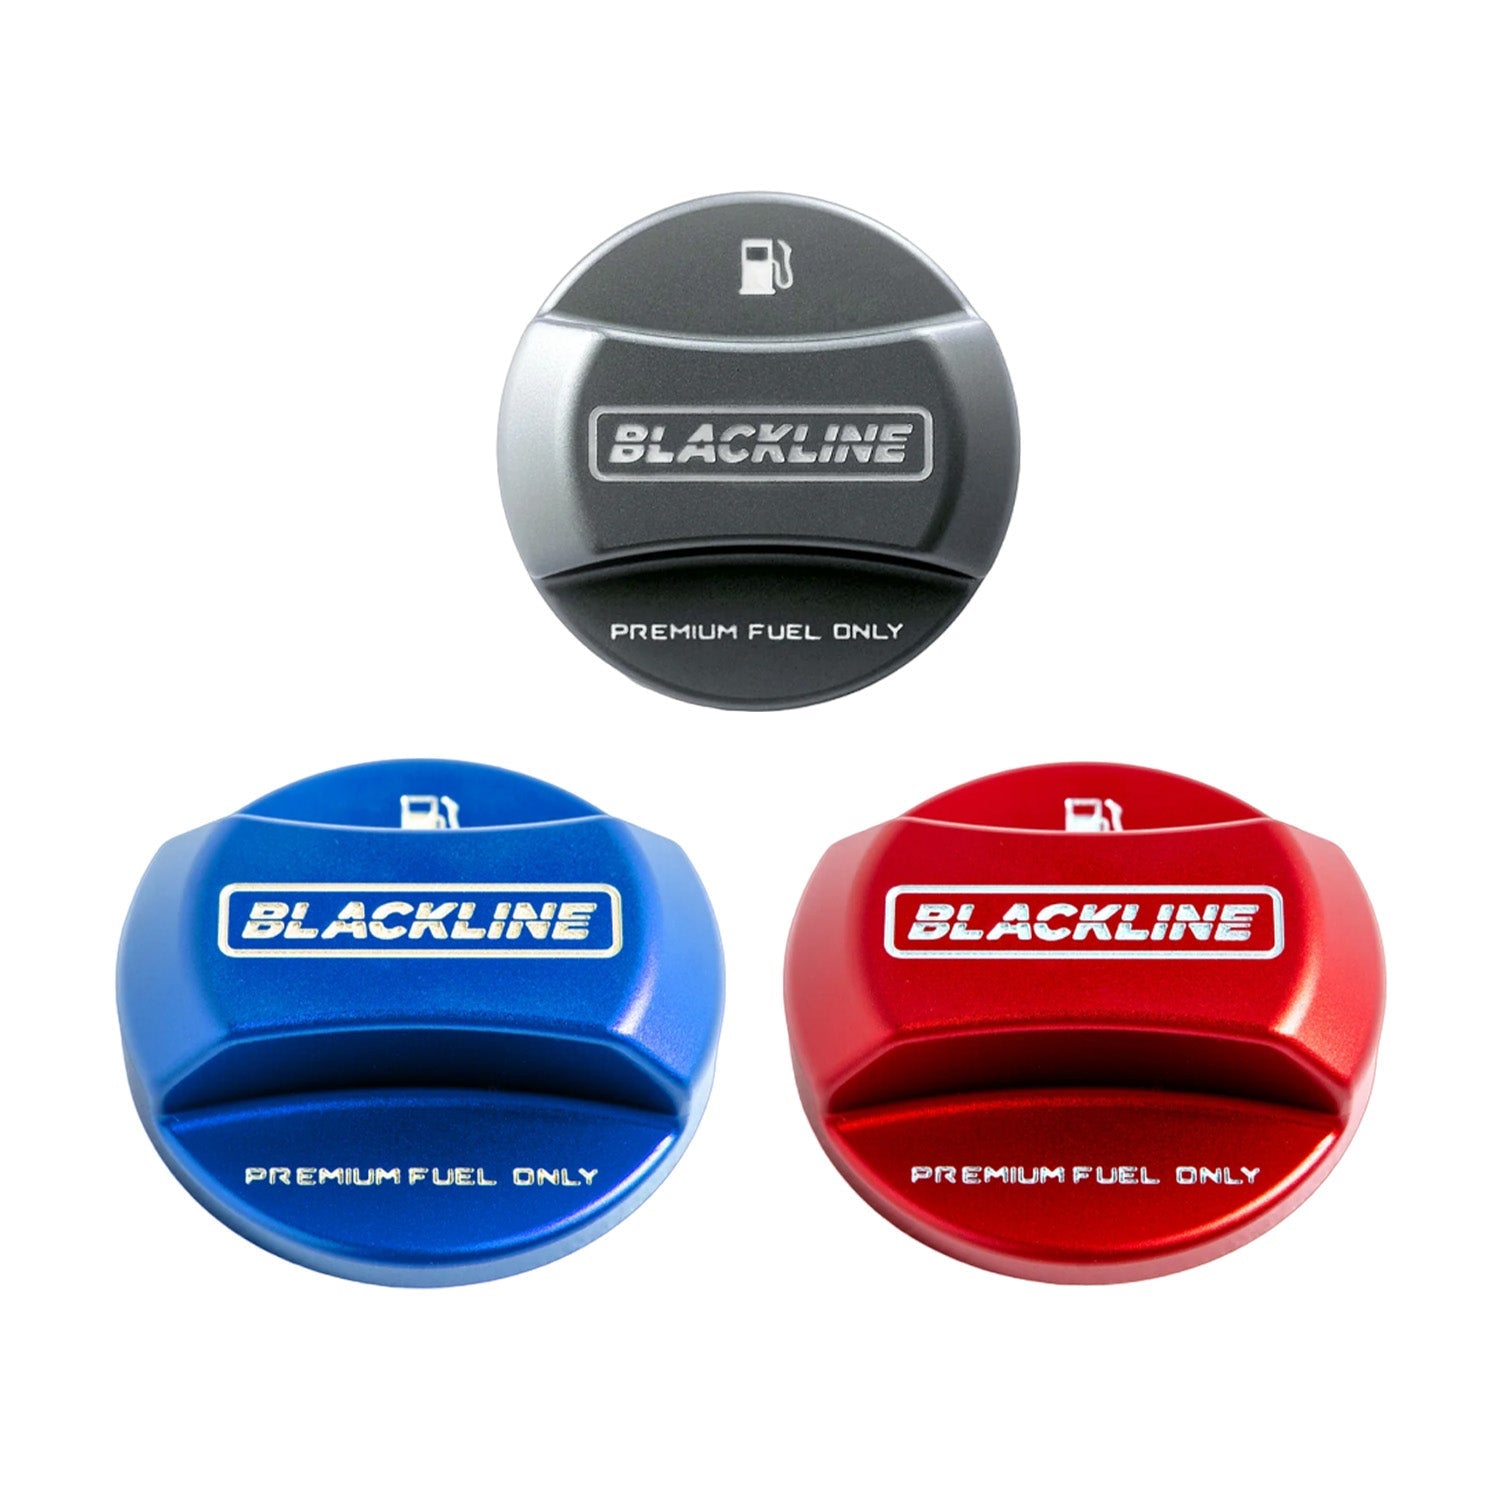 GoldenWrench BMW BLACKLINE "Premium Fuel Only" Performance Fuel Cap Cover for BMW (2010+)